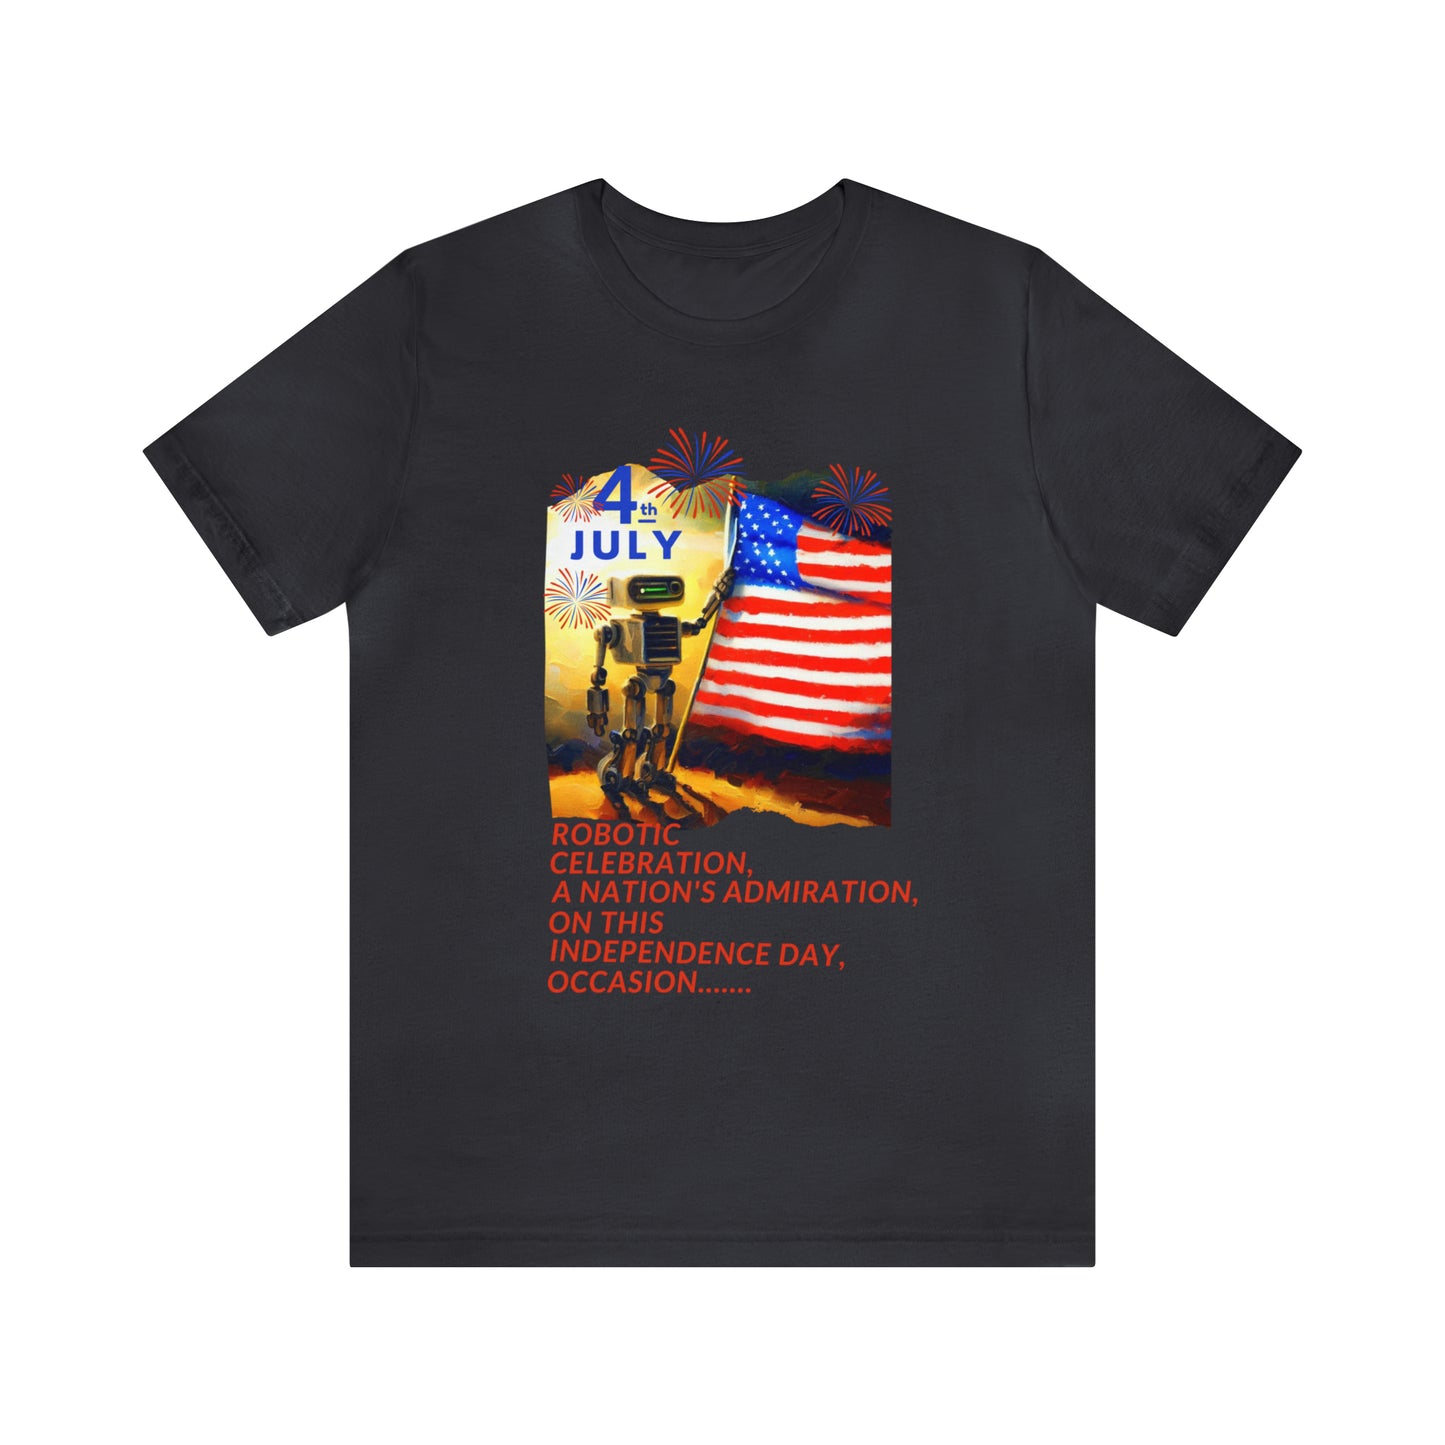 US Independence Day collection. Unisex Jersey.